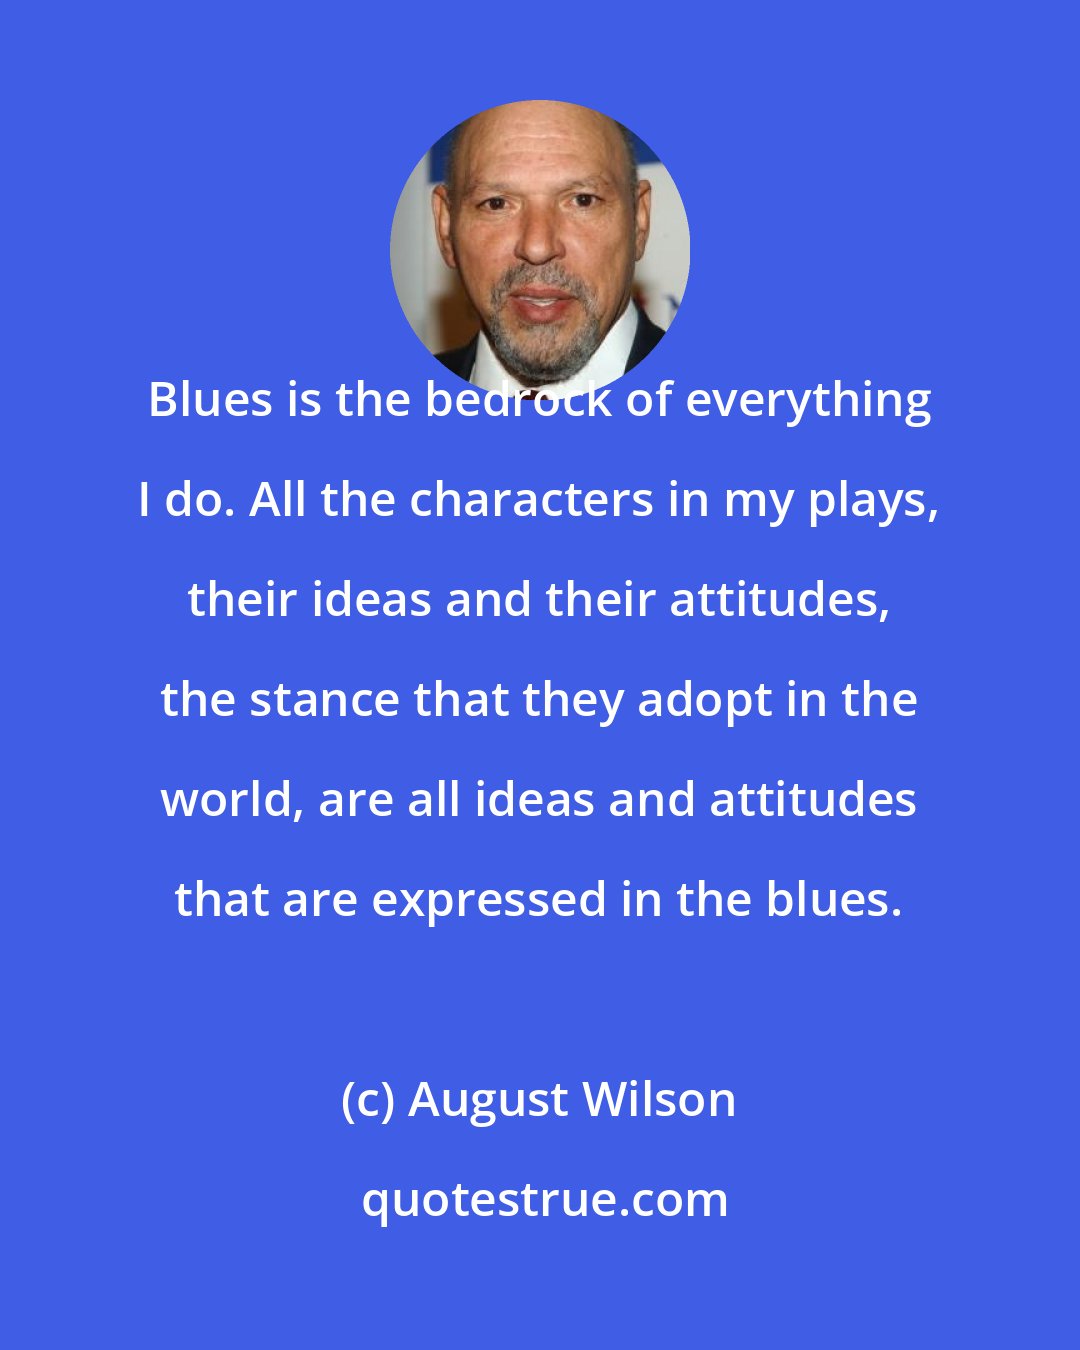 August Wilson: Blues is the bedrock of everything I do. All the characters in my plays, their ideas and their attitudes, the stance that they adopt in the world, are all ideas and attitudes that are expressed in the blues.